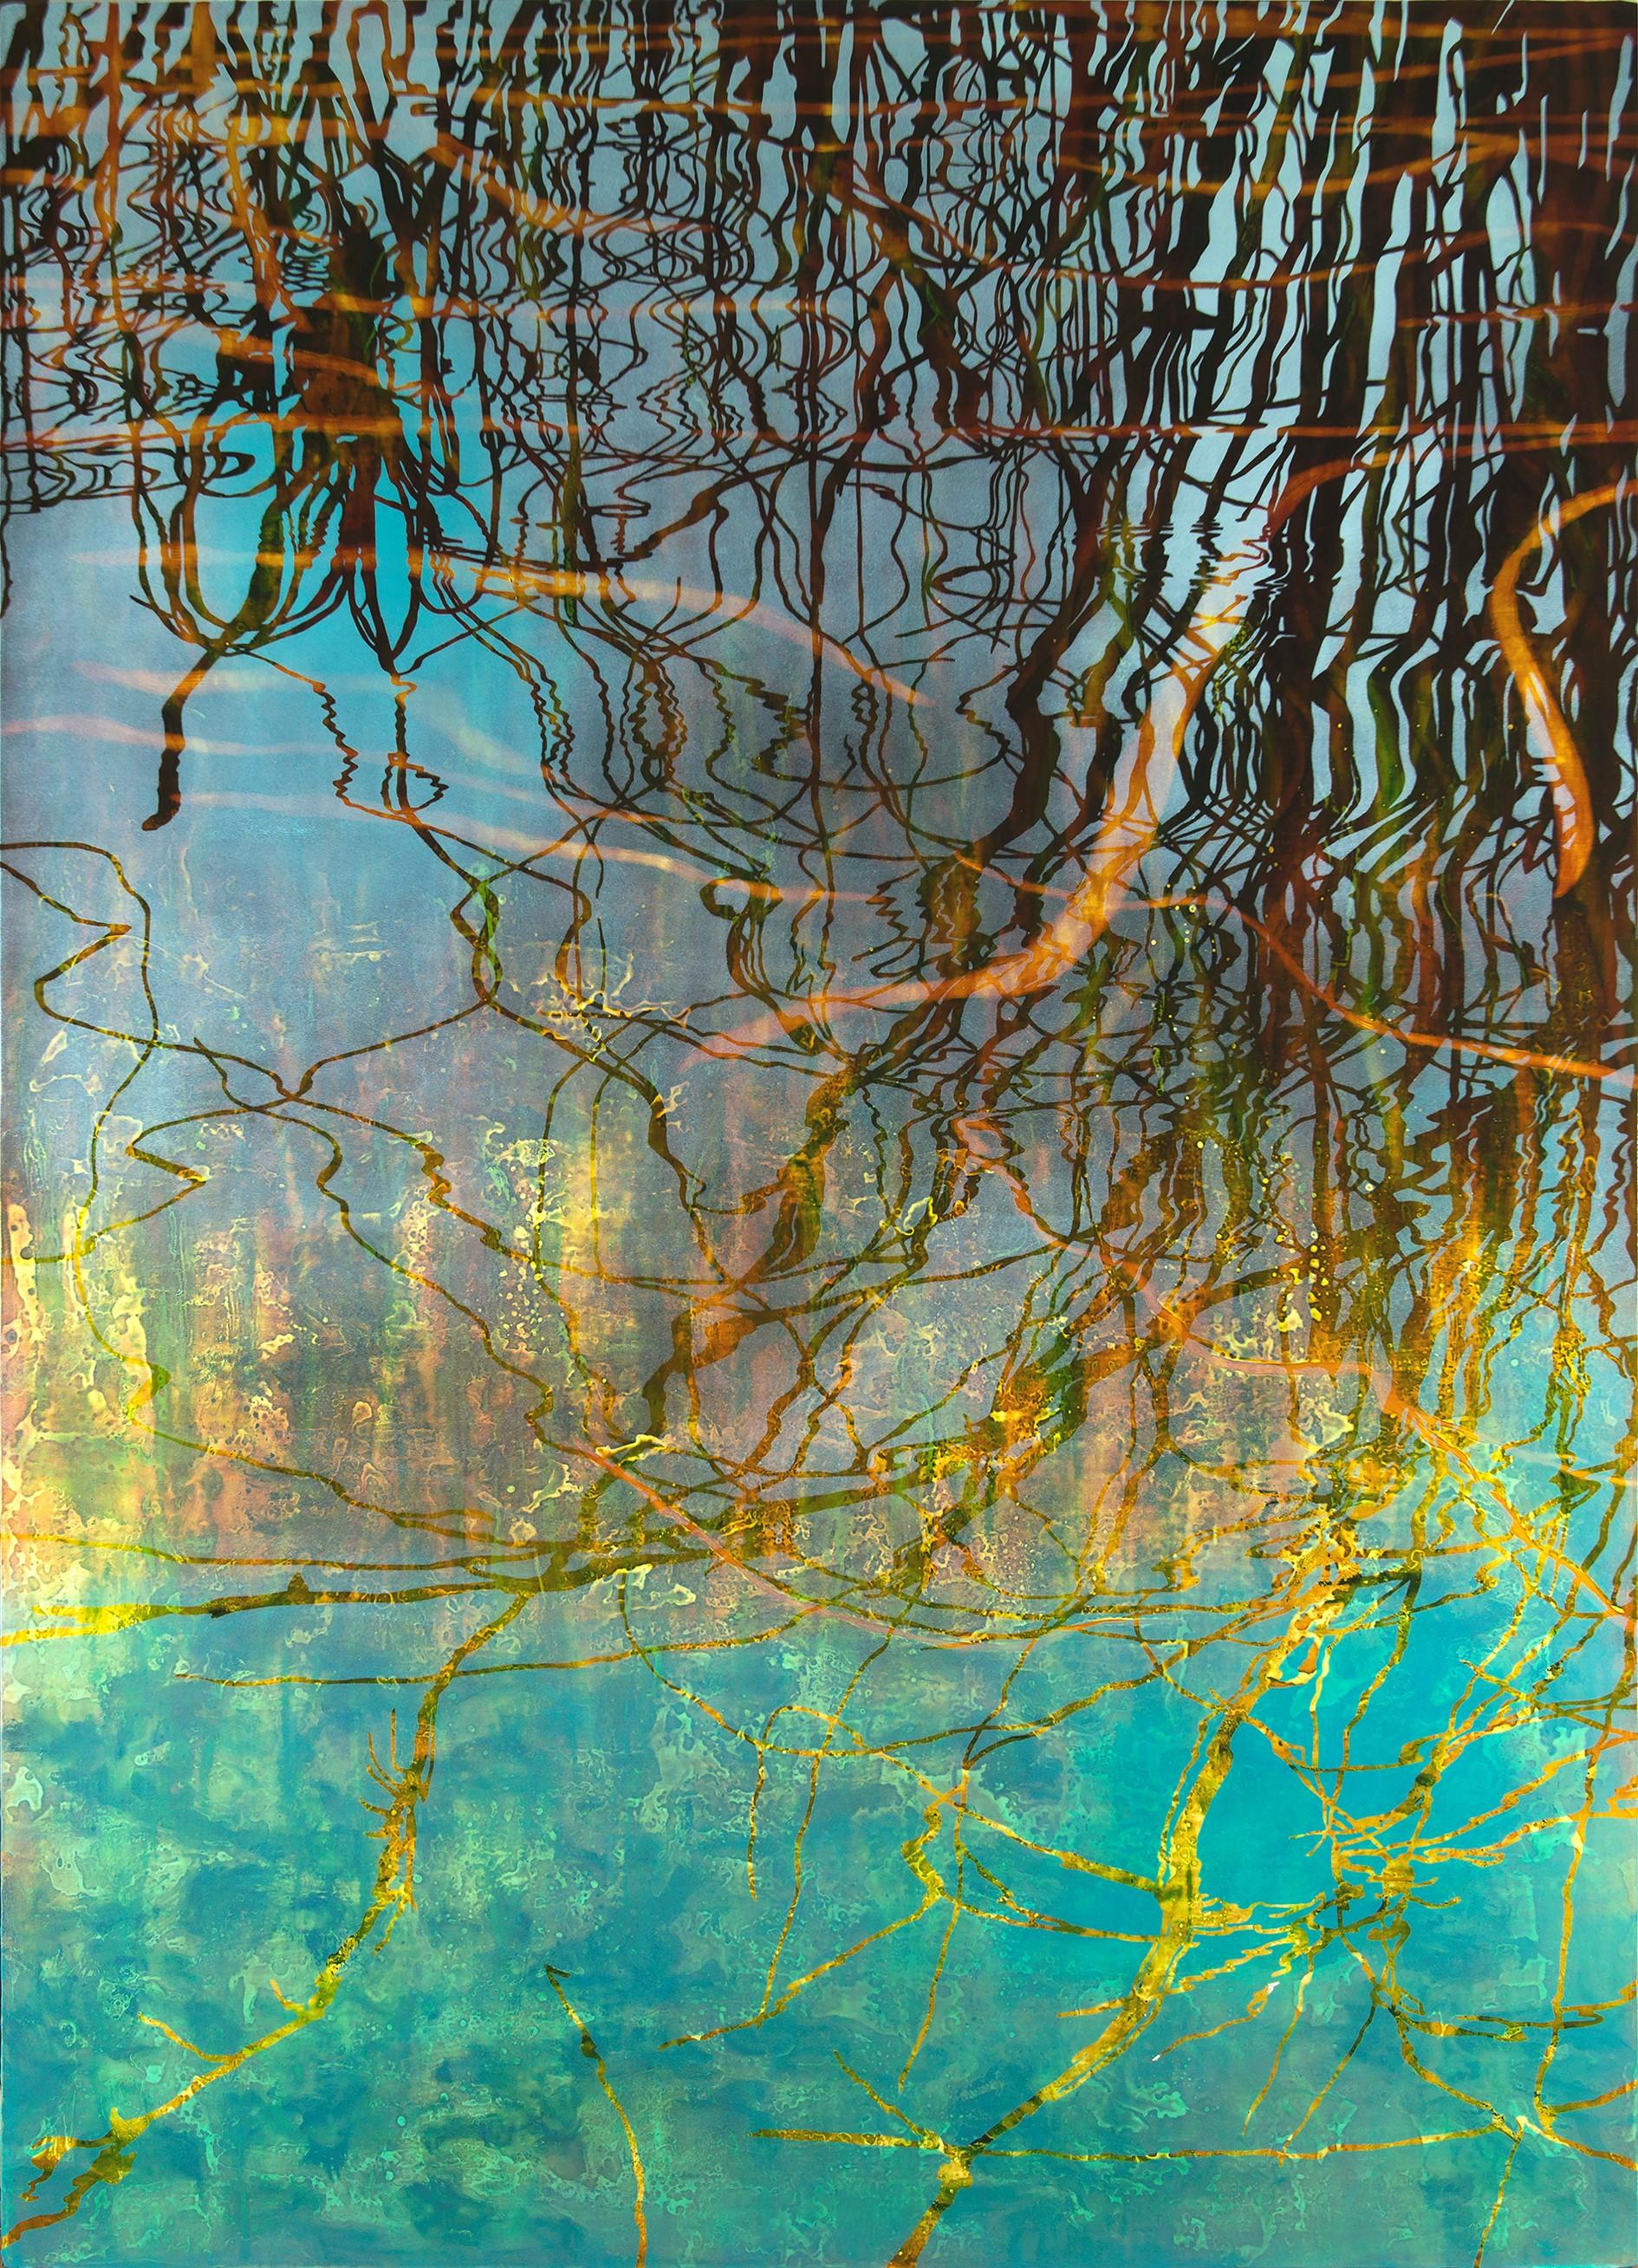 Perididas III- Water Reflections Turquoise and Gold tones 70 X 51